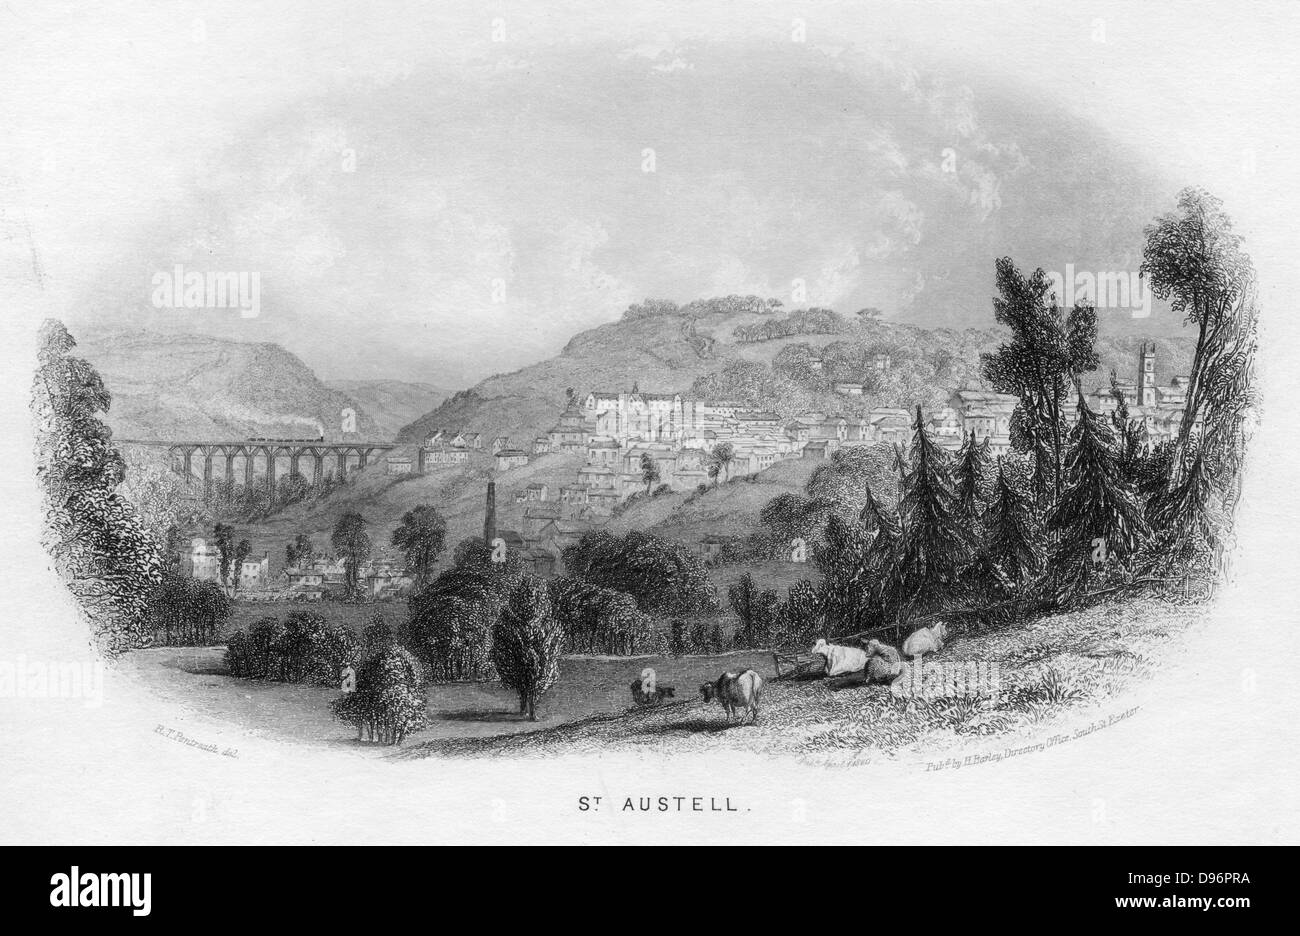 St Austell', 1860. Cornwall Railway, later Great Western Railway (GWR) at St Austell, showing one of Isambard Kingdom Brunel's (1806-1859) timber viaducts. Built from Kyanzed yellow Baltic pine from Memel, the timberwork had a life of 30 years. Illustration by RT Pentreath for 'Views of Devonshire and Cornwall' by Henry Besley. (Exeter c1860). Engraving. Stock Photo